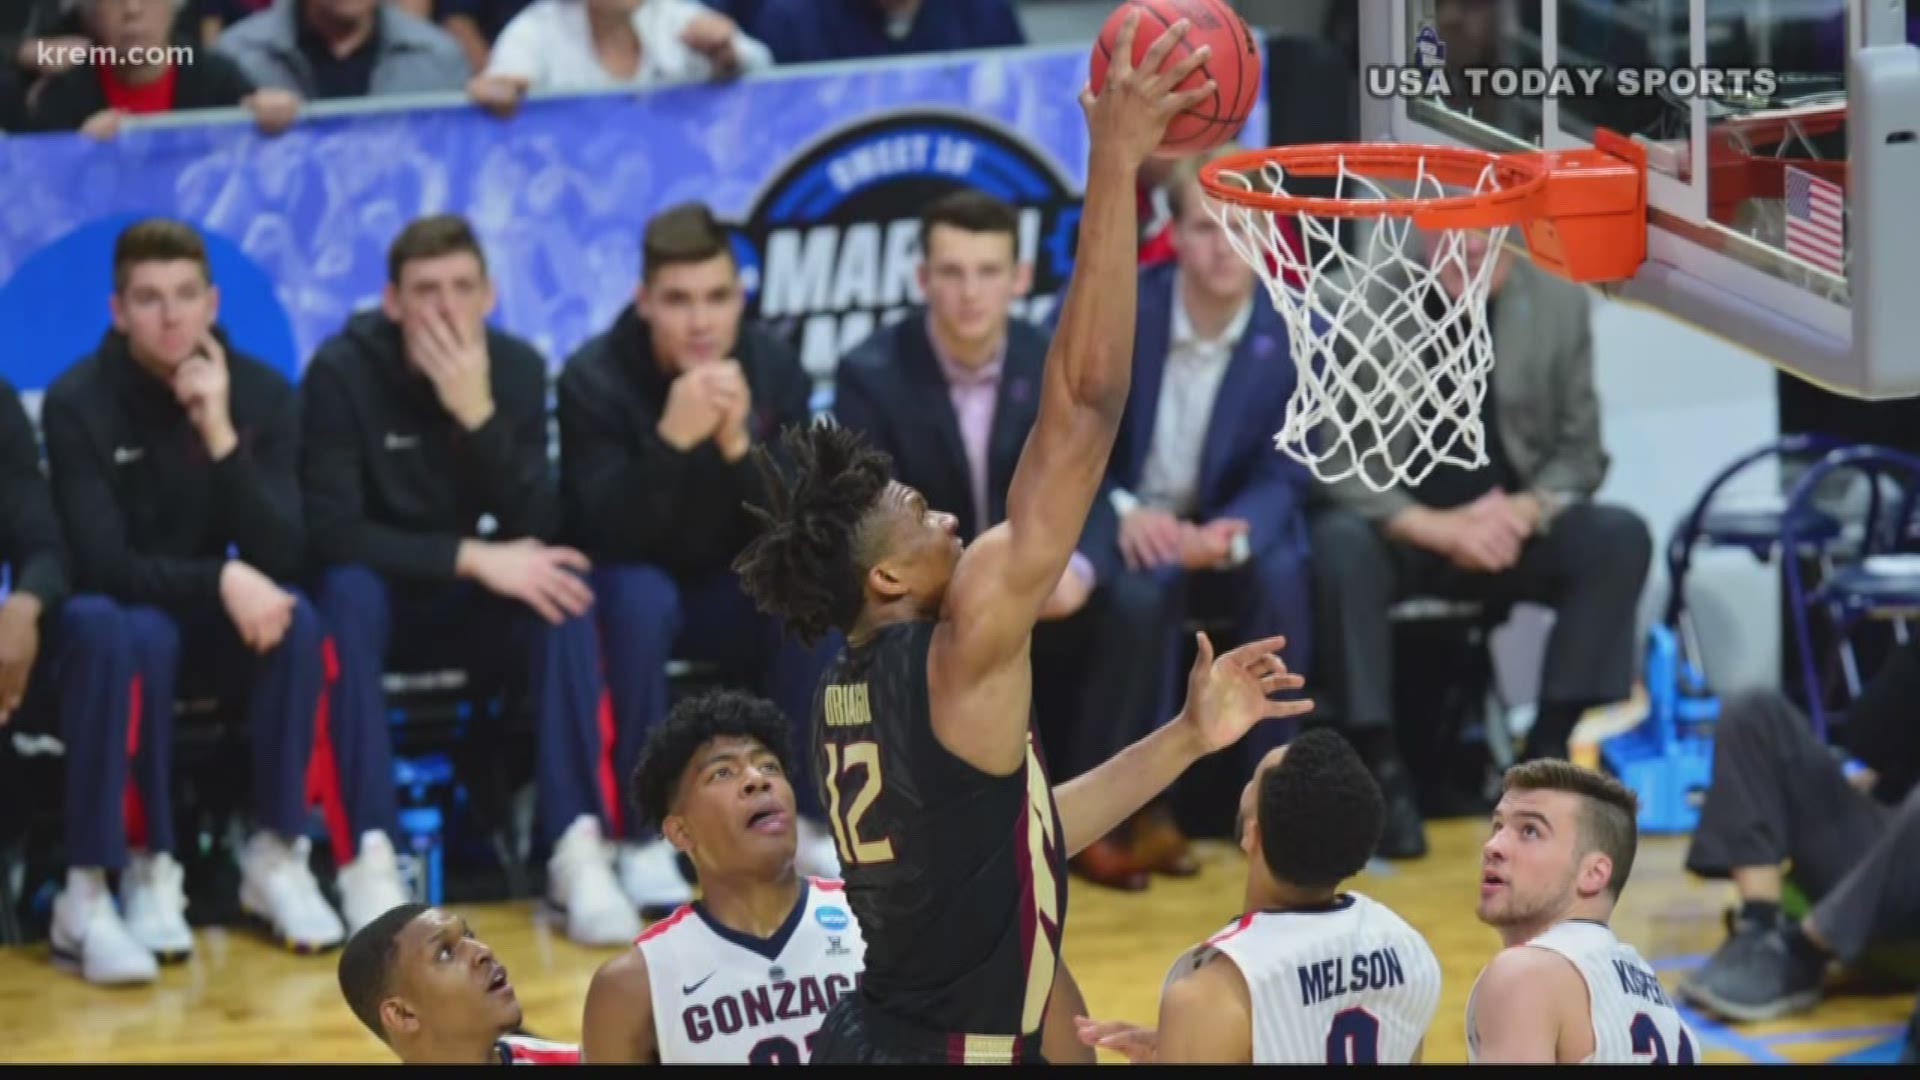 Gonzaga loses to Florida State in the Sweet 16